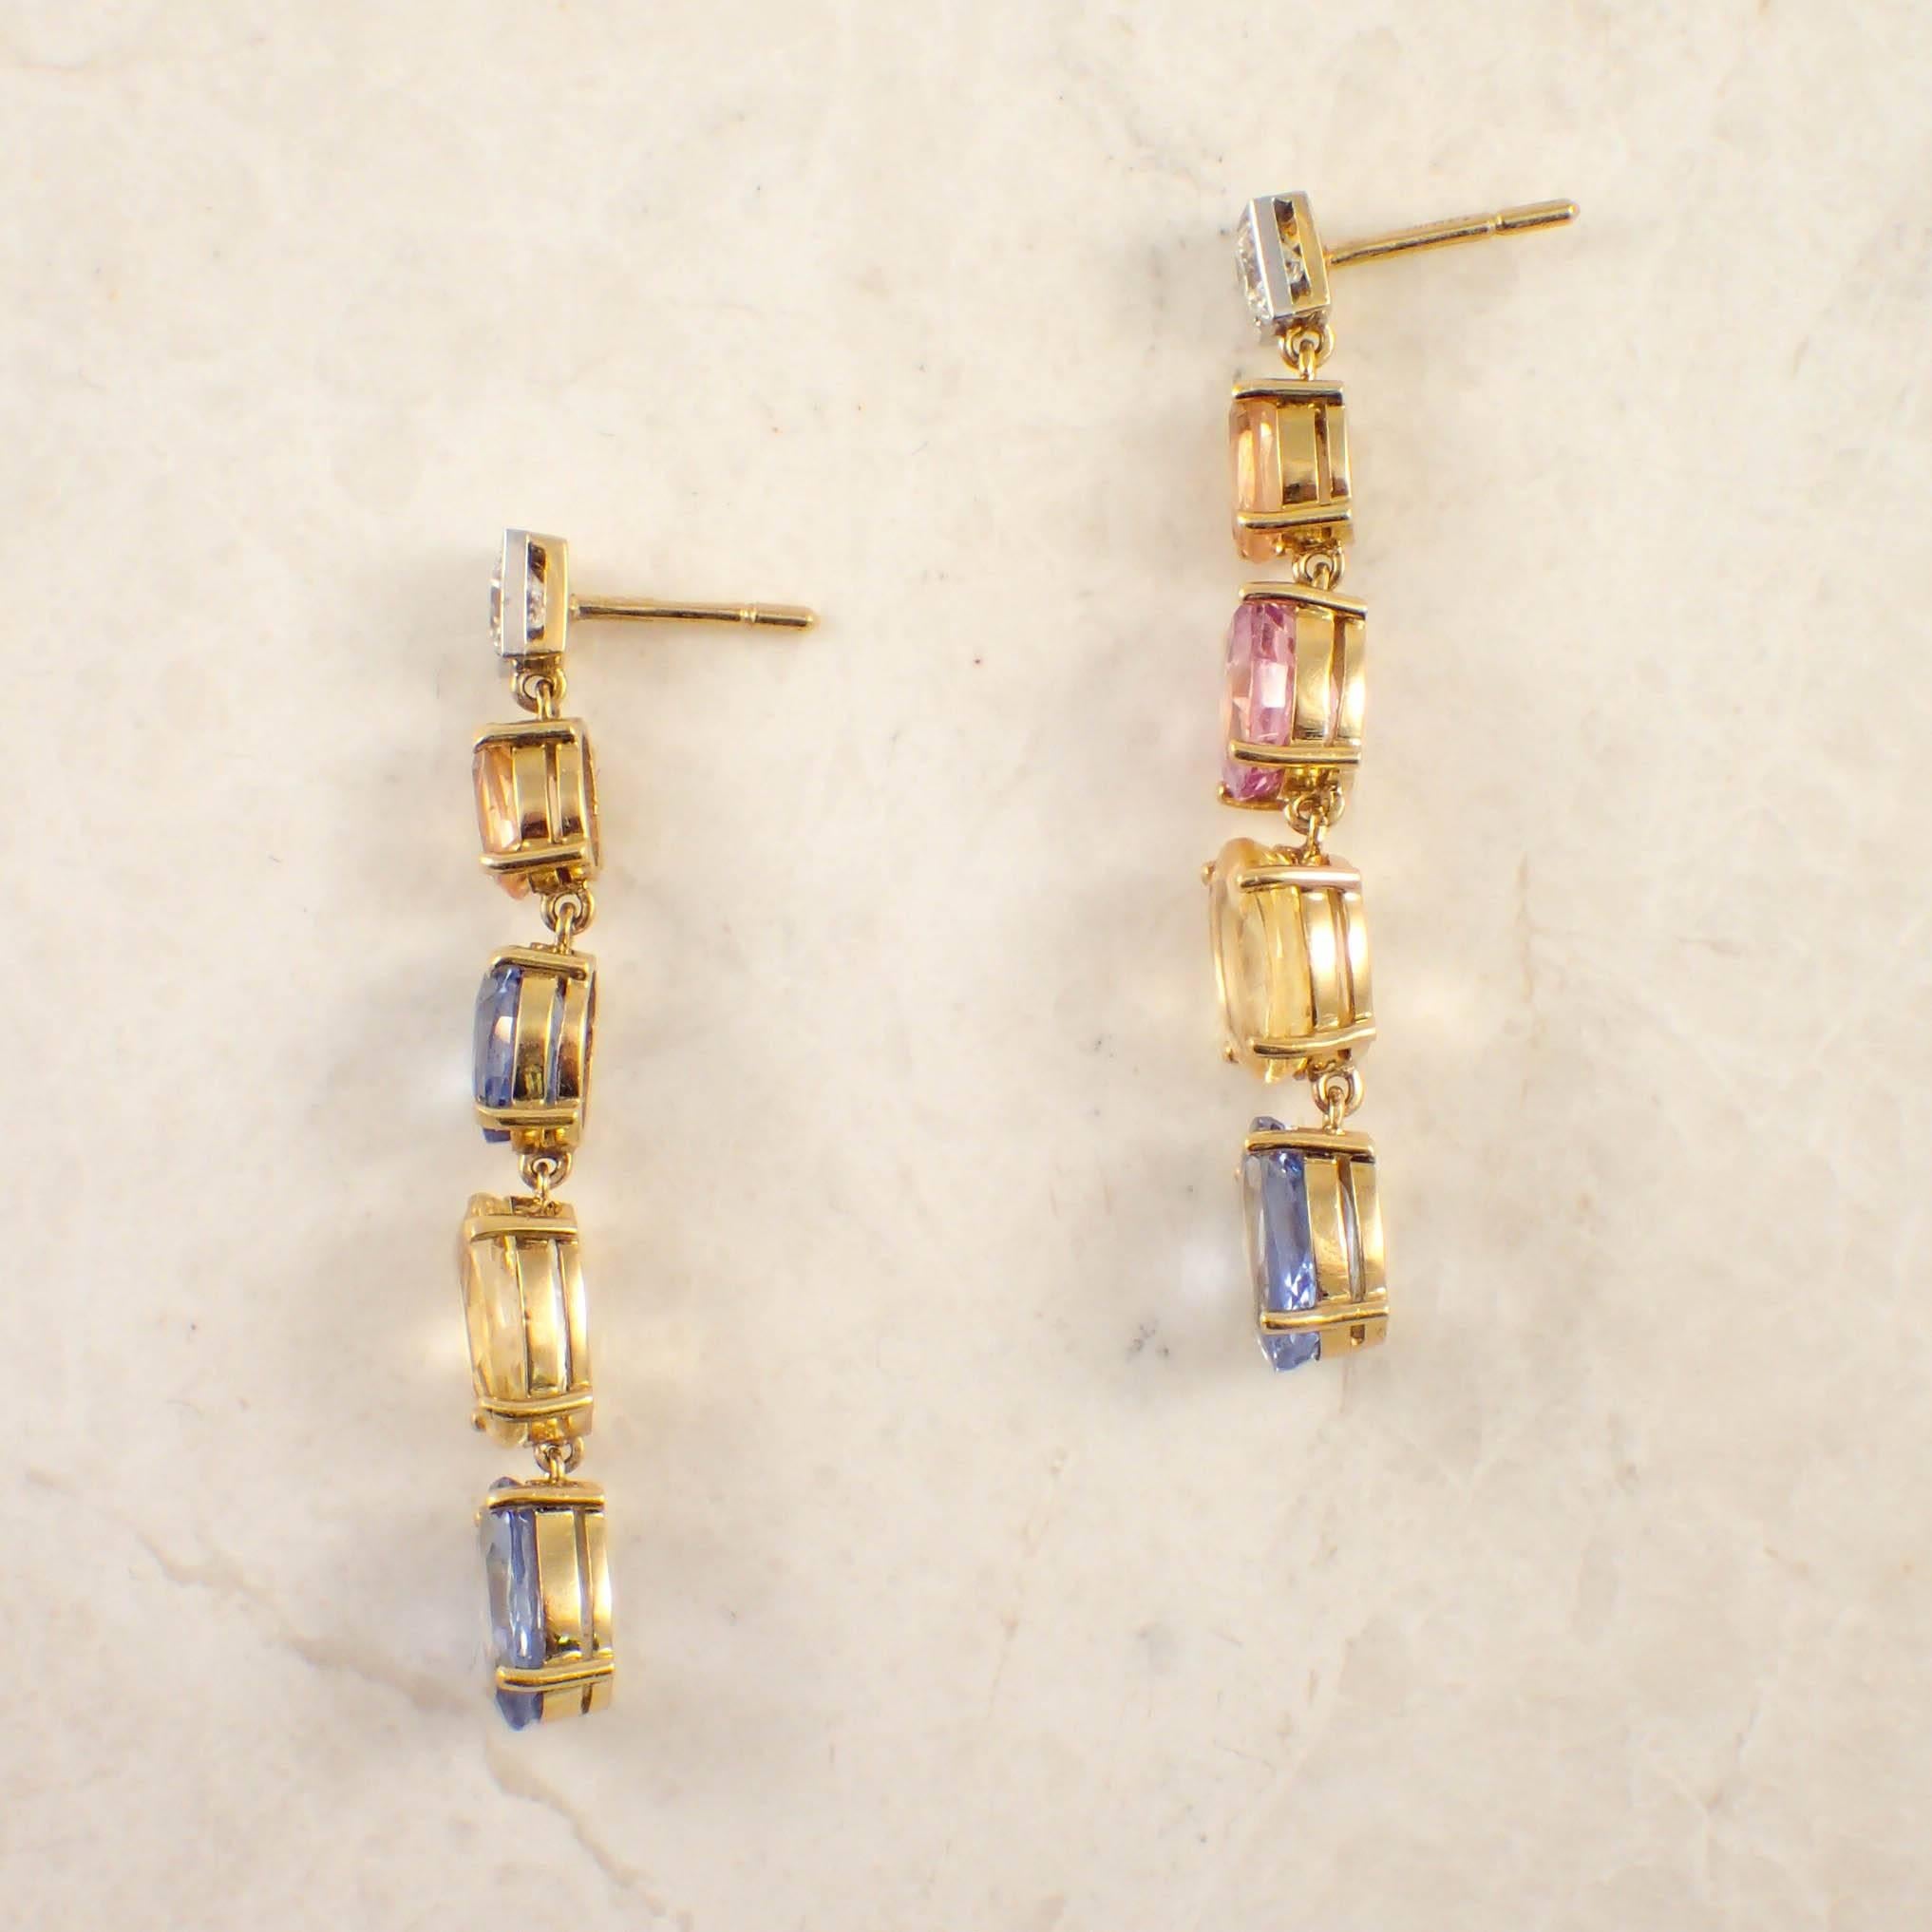 18K White and yellow gold multicolor sapphire and diamond earrings. The drop earrings are set with 2 round diamonds weighing approximately .60 carat total, each suspending 8 oval sapphires weighing approximately 11 carats total. The drops measure 2